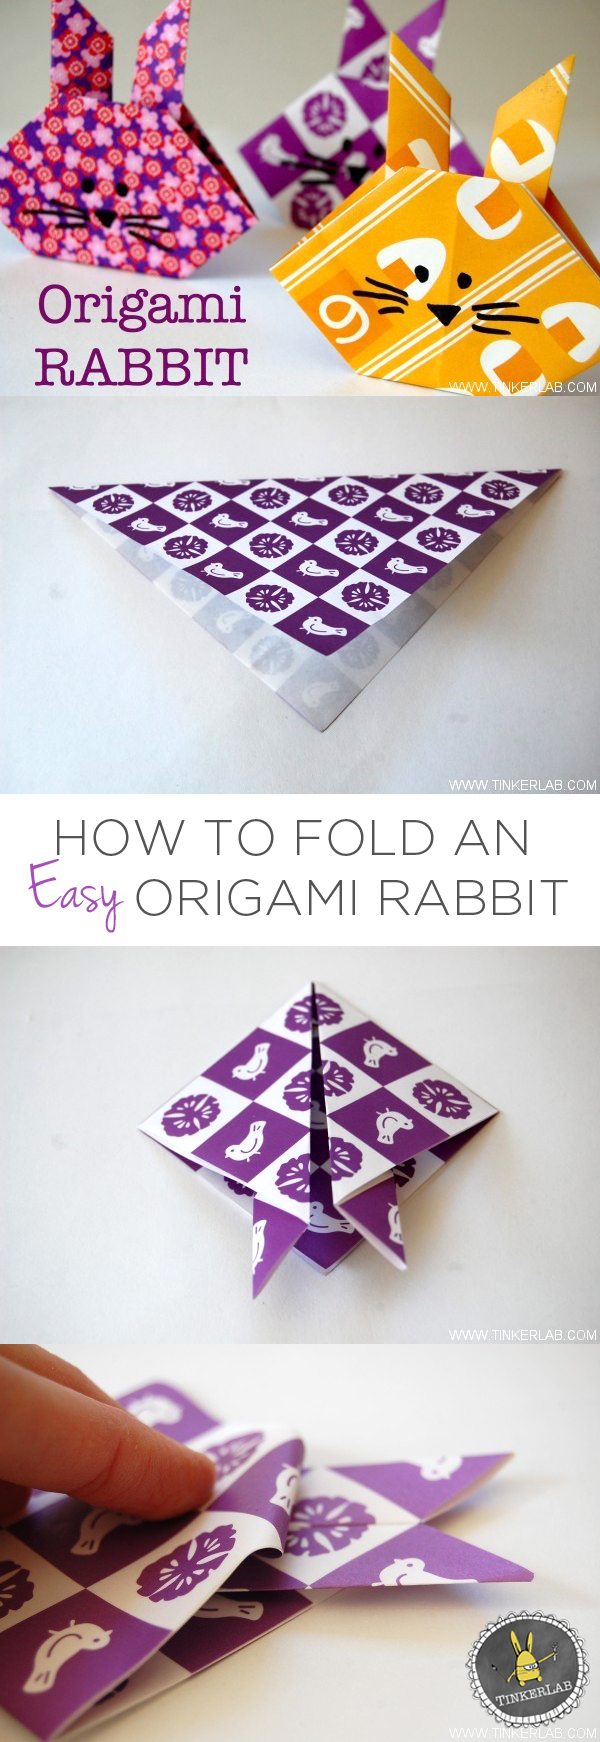 Simple Origami Rabbit How To Make An Origami Rabbit Simple And Cute